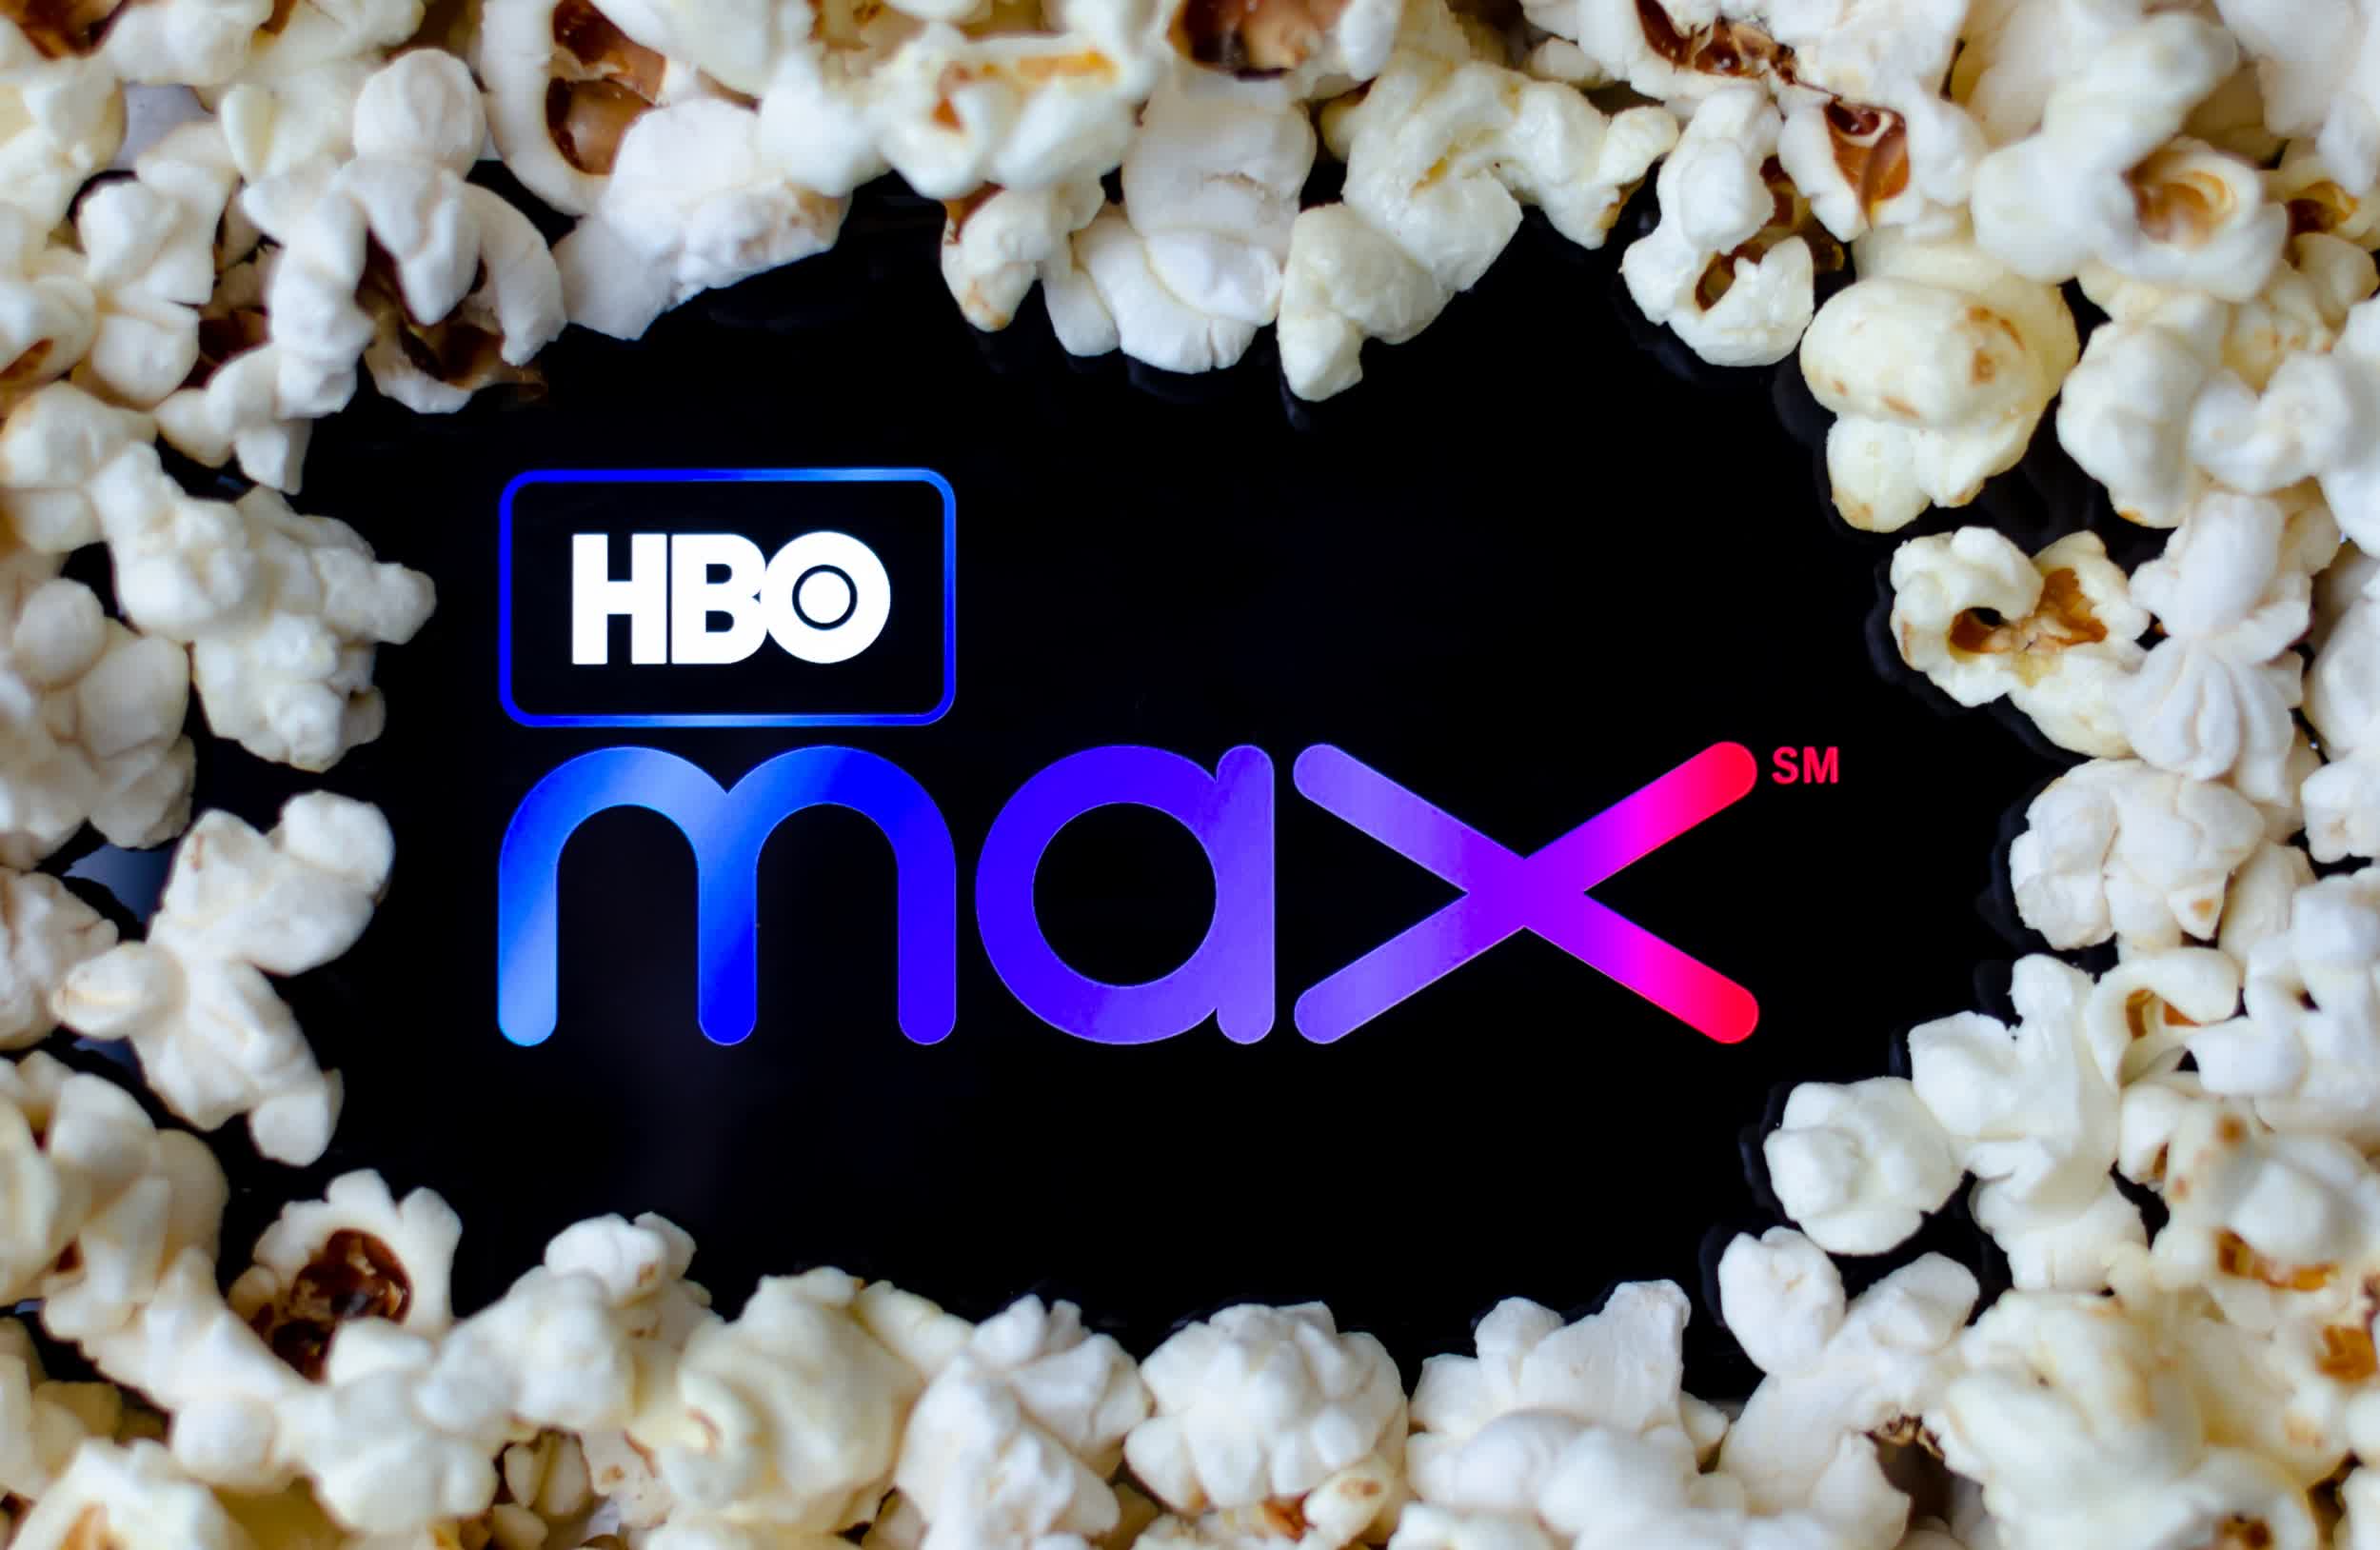 HBO Max hits 12.6 million activations ahead of Wonder Woman 1984 launch on Christmas Day